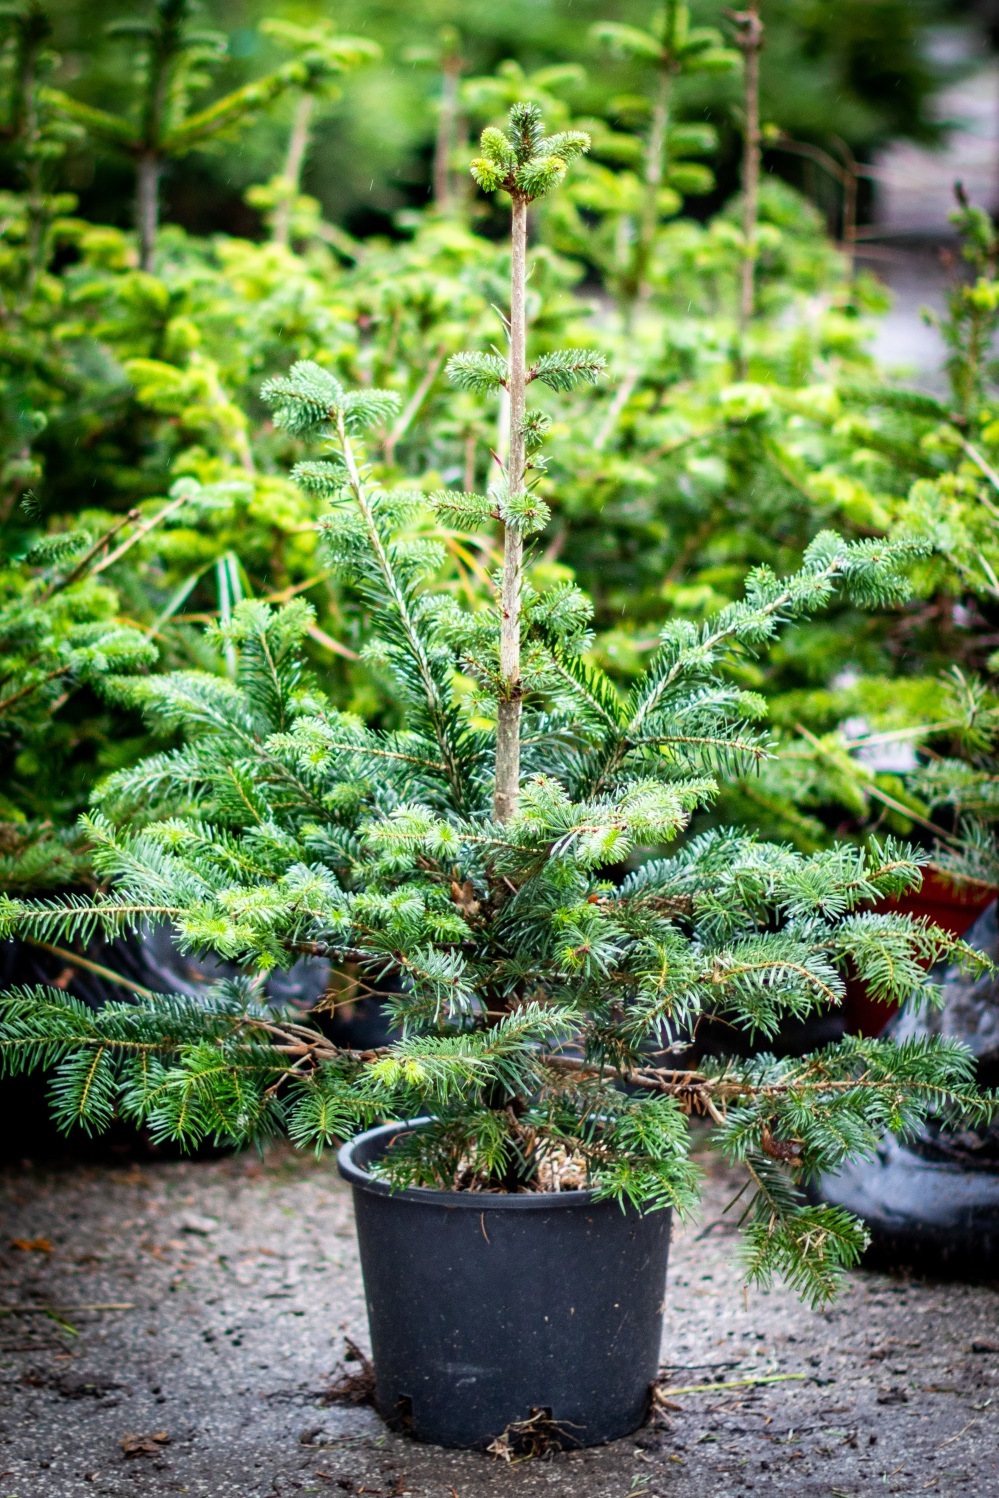 Mishapen Christmas trees looking for a new home